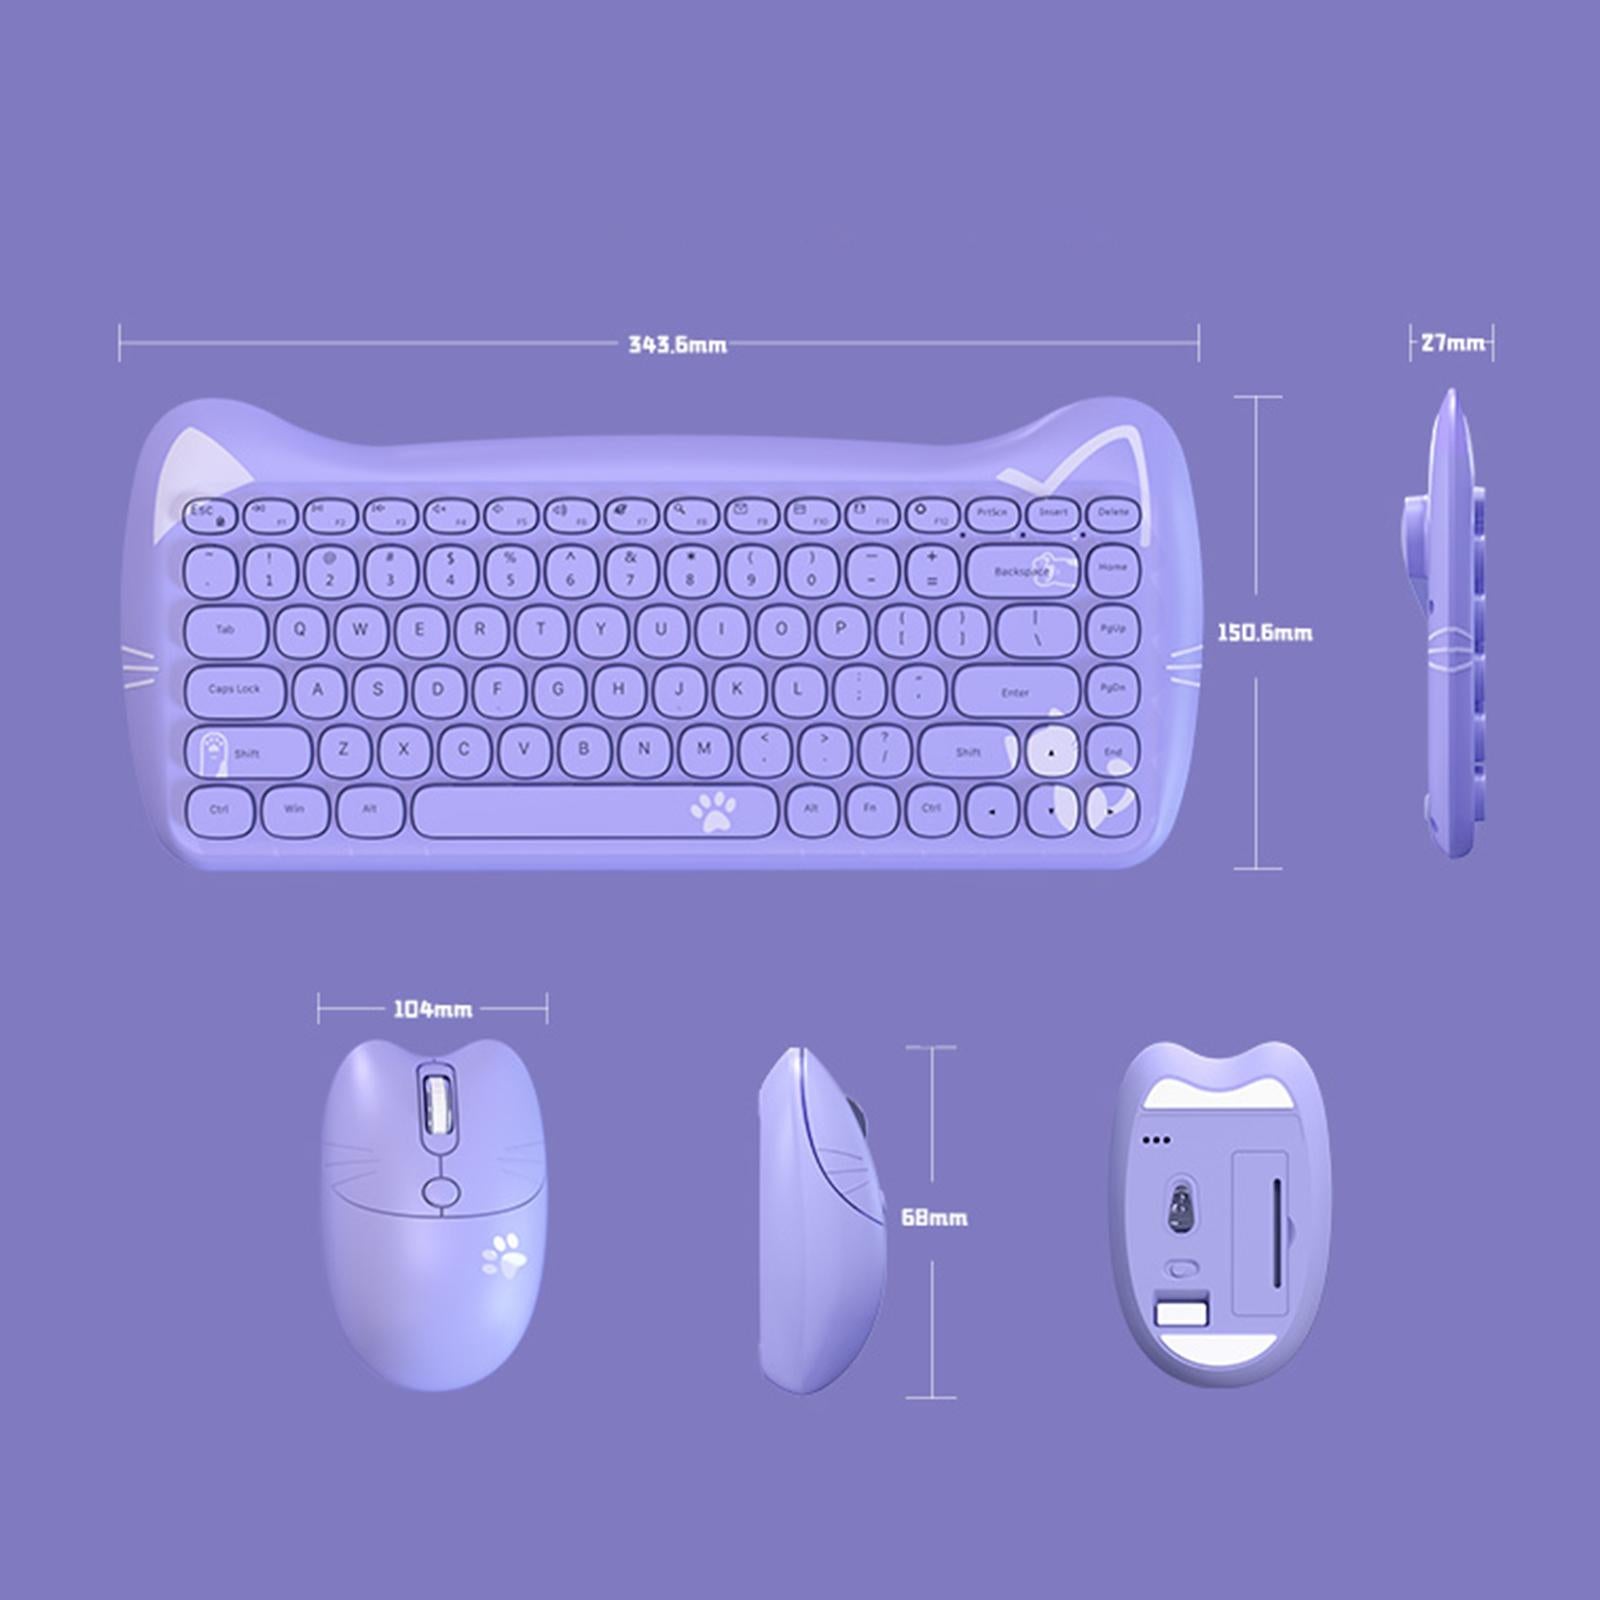 Wireless Keyboard and Mouse Set 84 Keys Silent Mouse for Notebook Purple